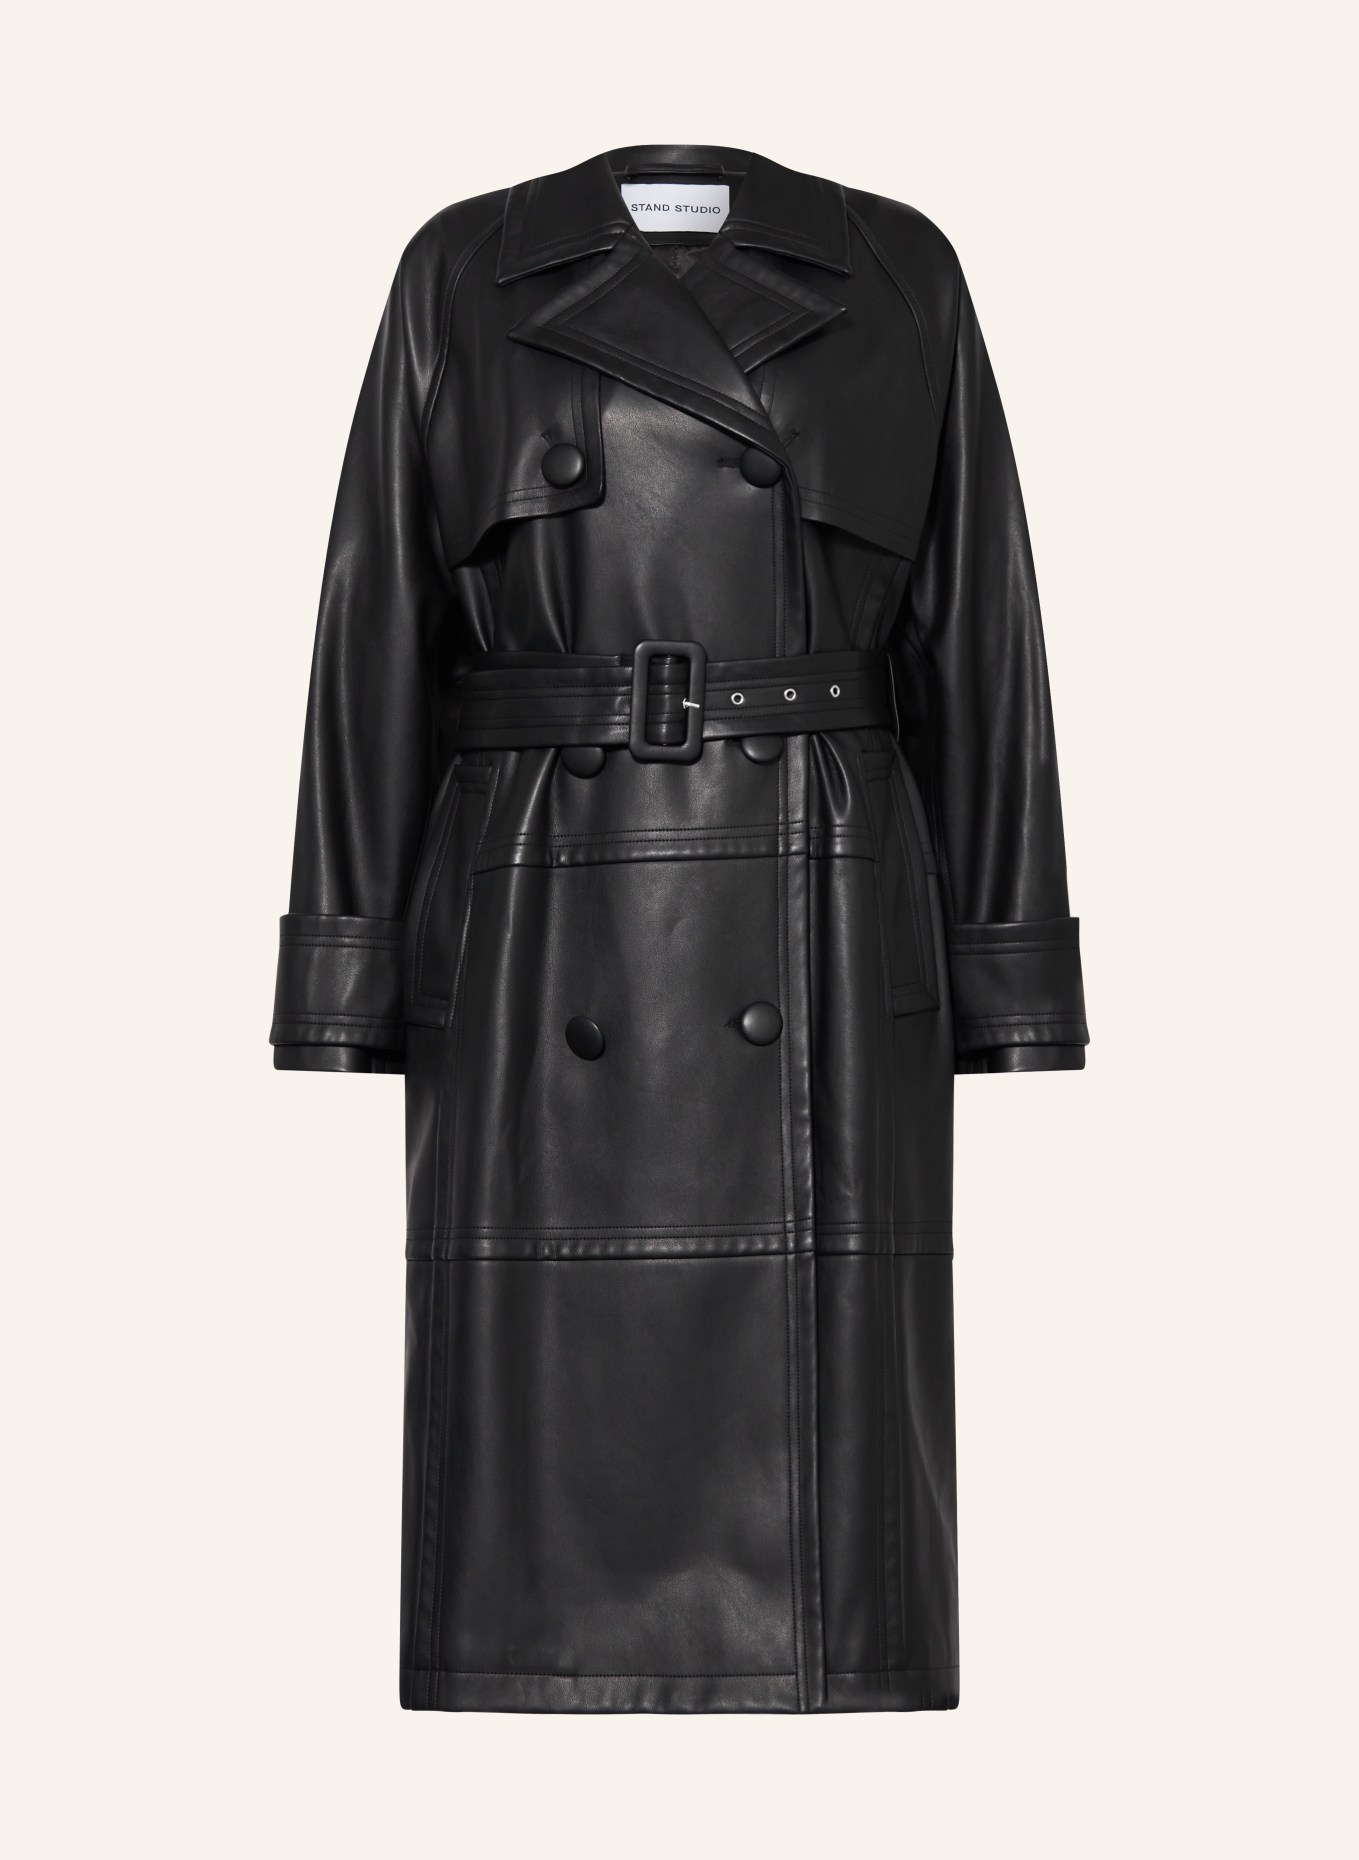 STAND STUDIO Trench coat BETTY made of leather, Color: BLACK (Image 1)